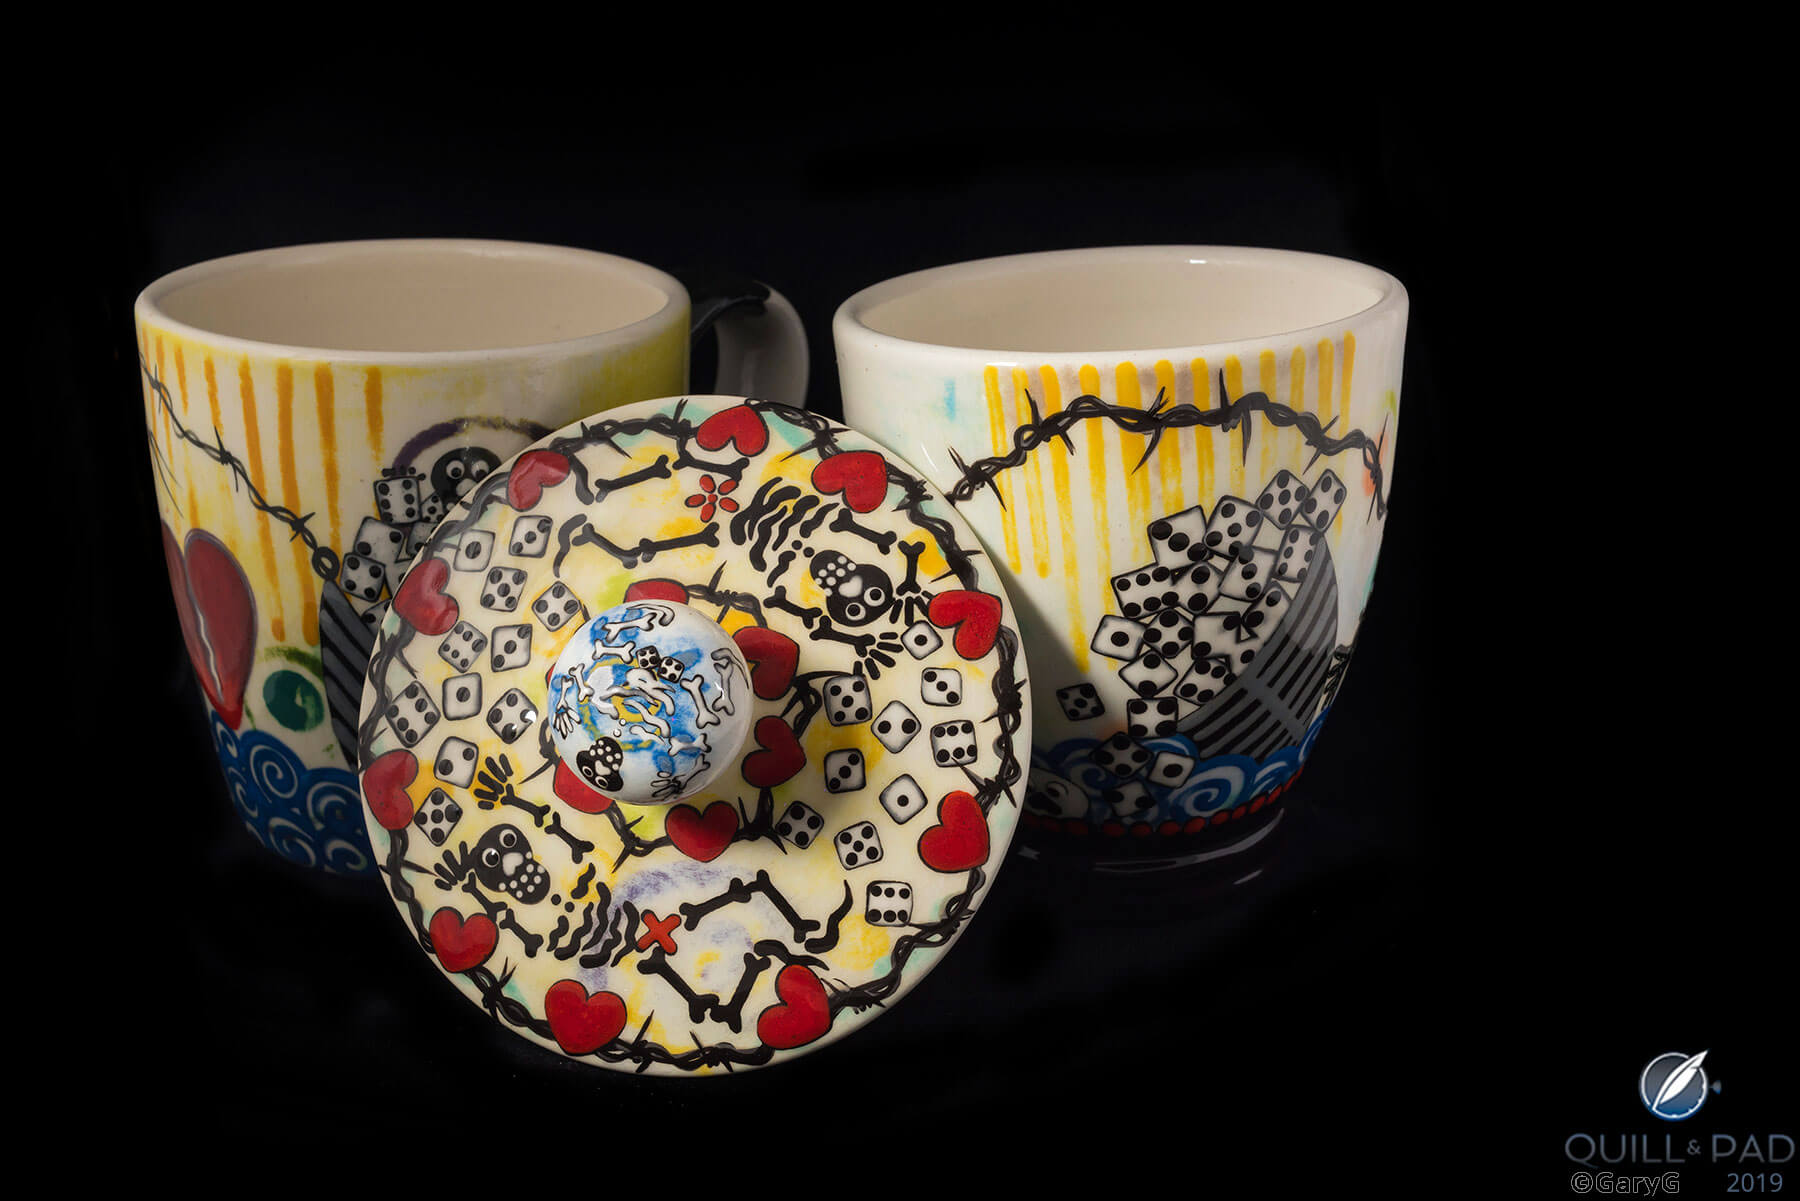 Day of the Dead teacup and sugar bowl by artist Susie Ketchum (design copyrighted)